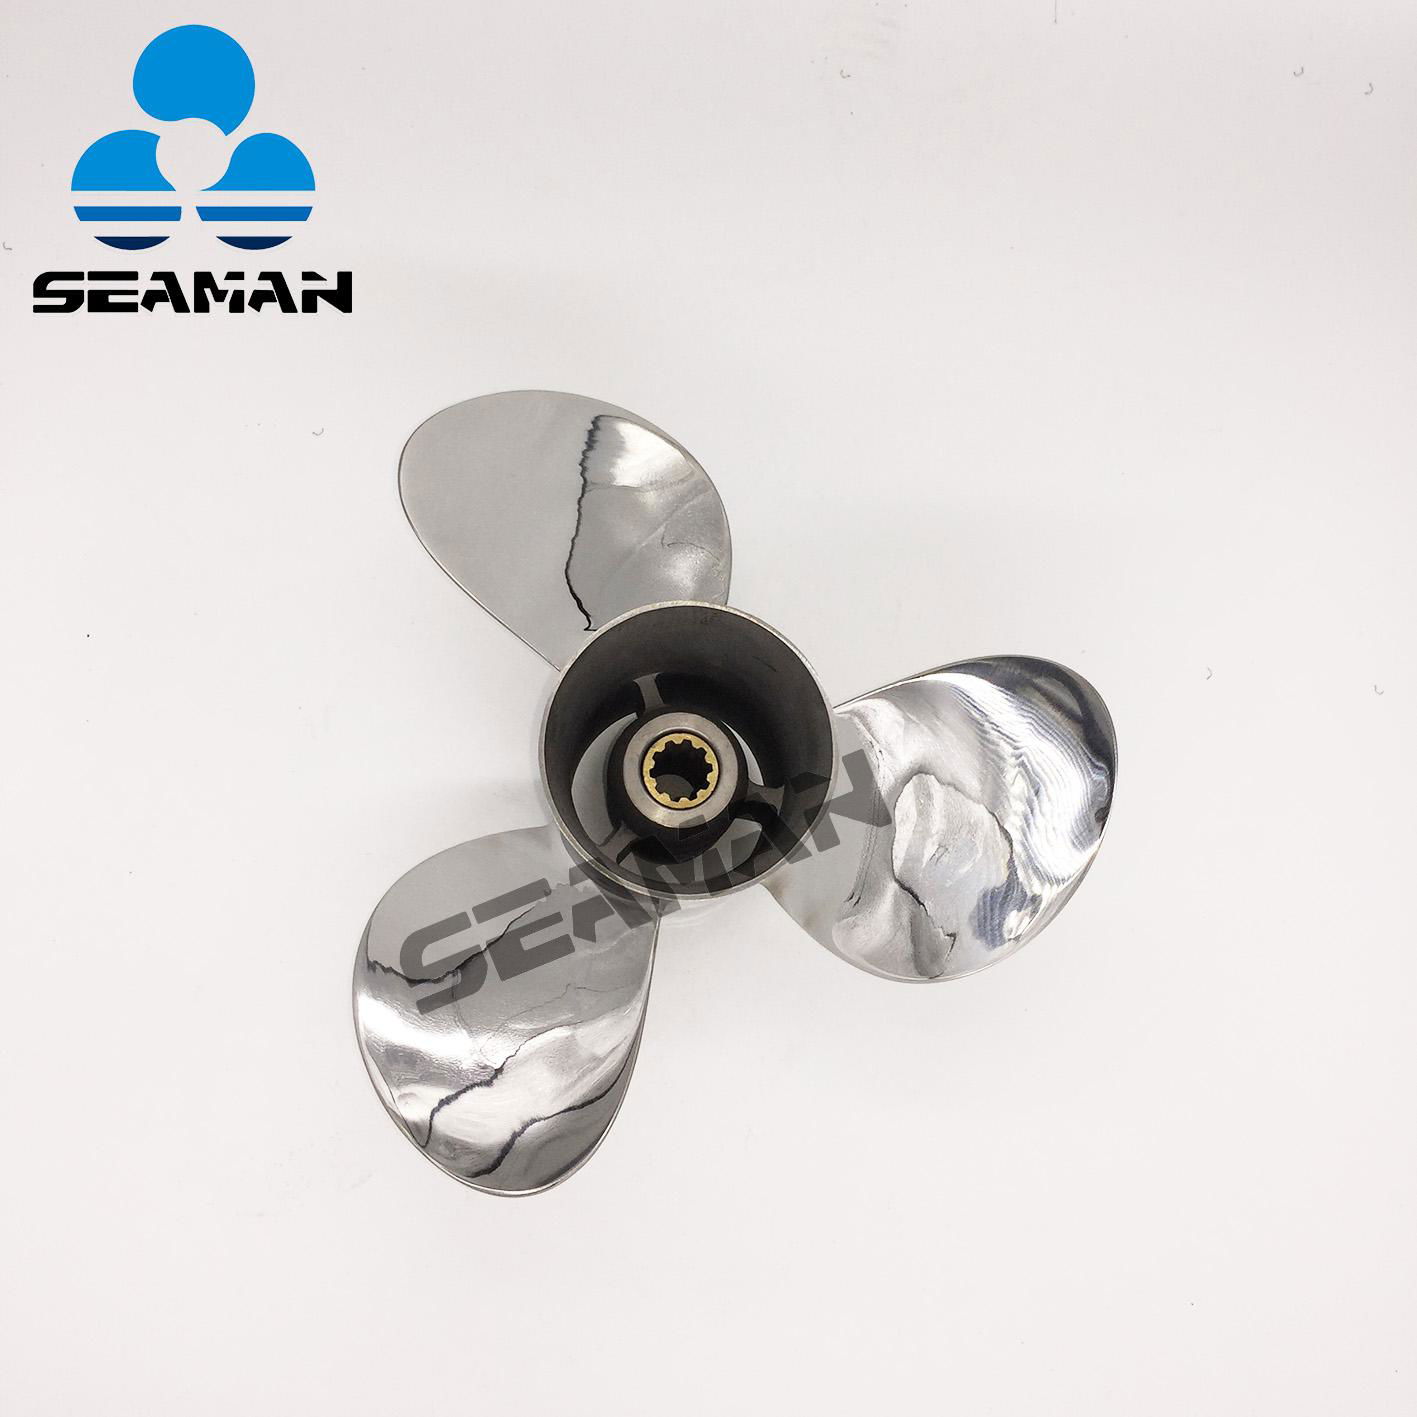 Stainless Steel Outboard Propeller 9-7/8X12 for Yamaha 20-30HP Engines 2